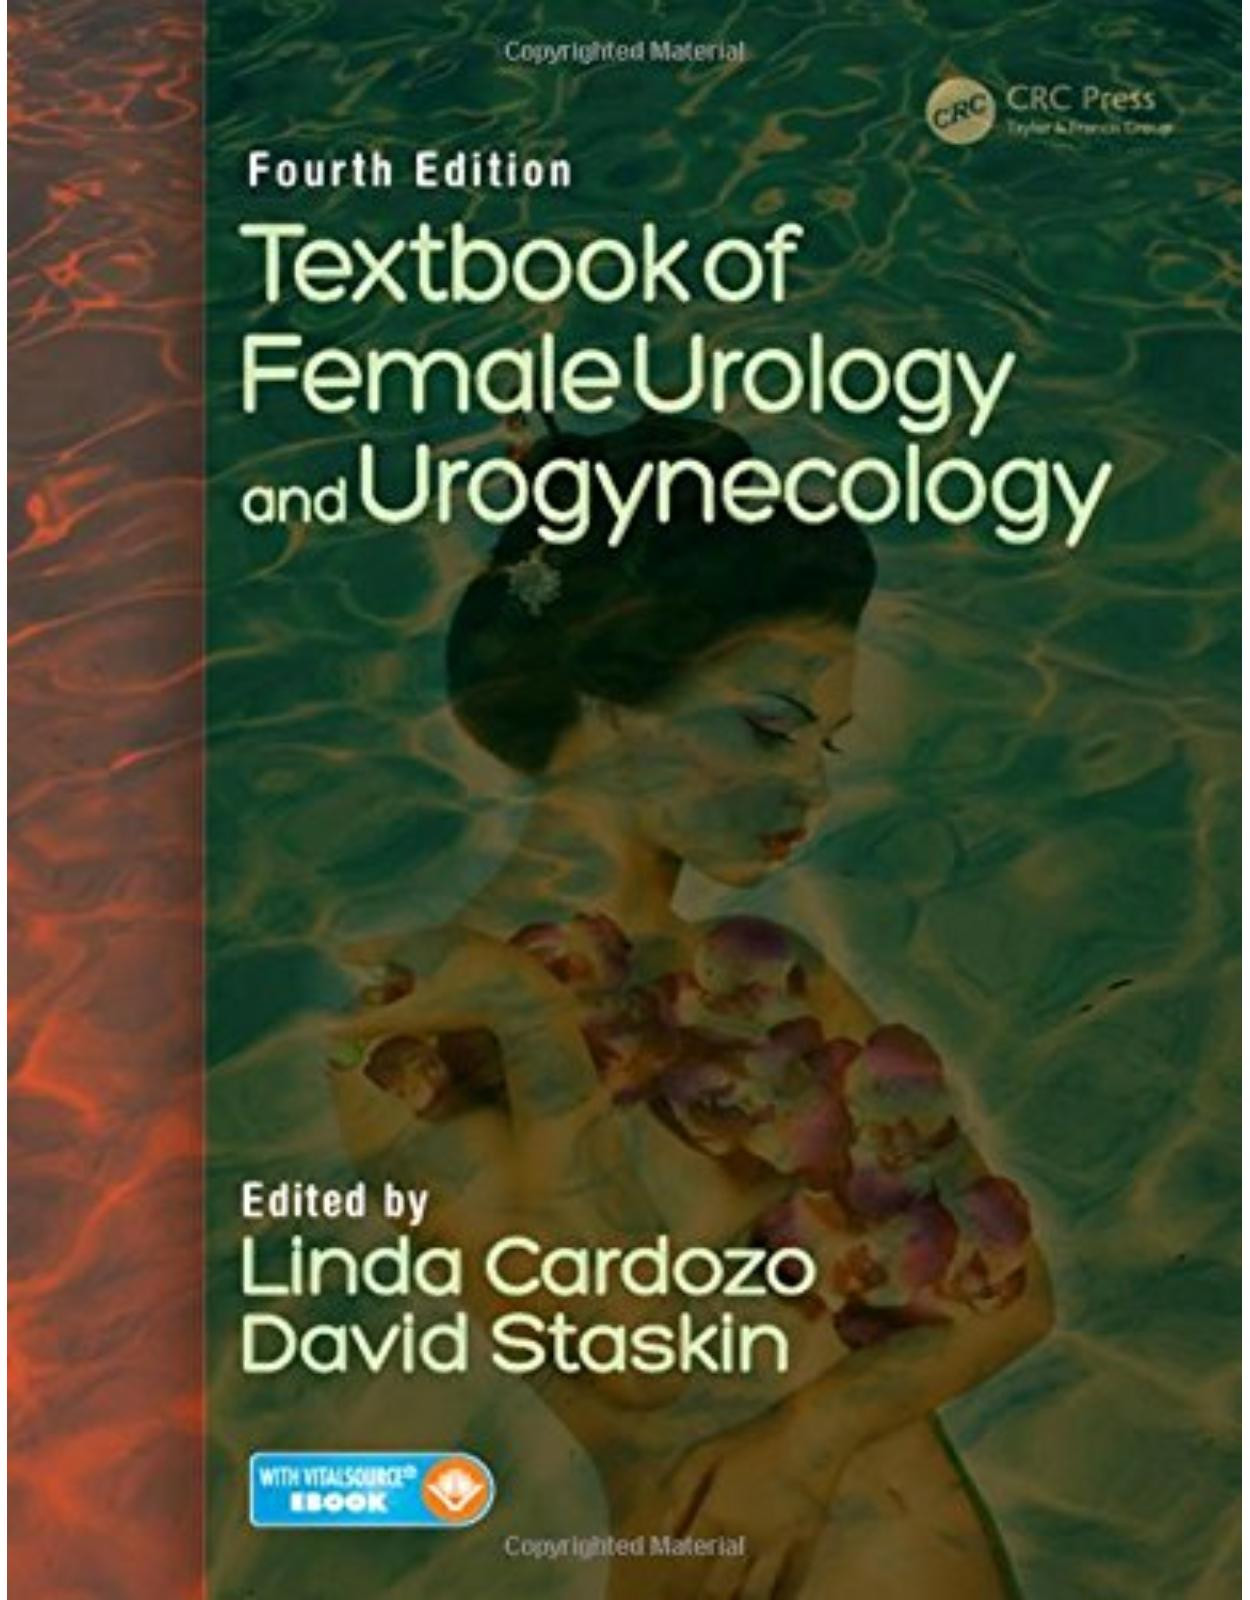 Textbook of Female Urology and Urogynecology, Fourth Edition - Two-Volume Set (2 Vol Set)